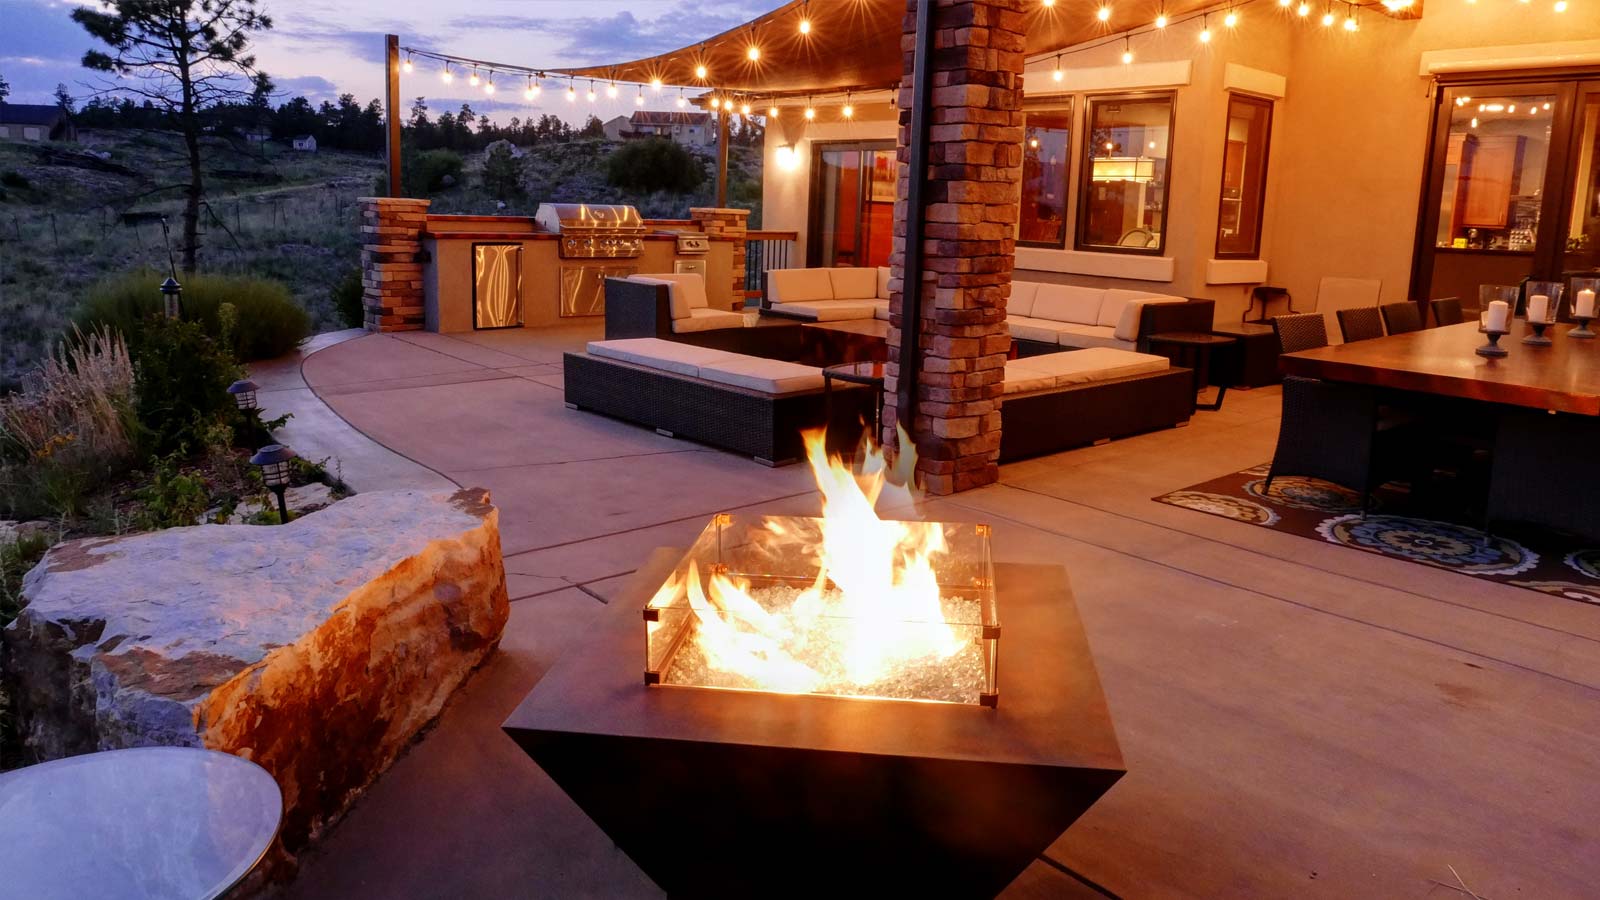 Fire pit designed with outdoor patio